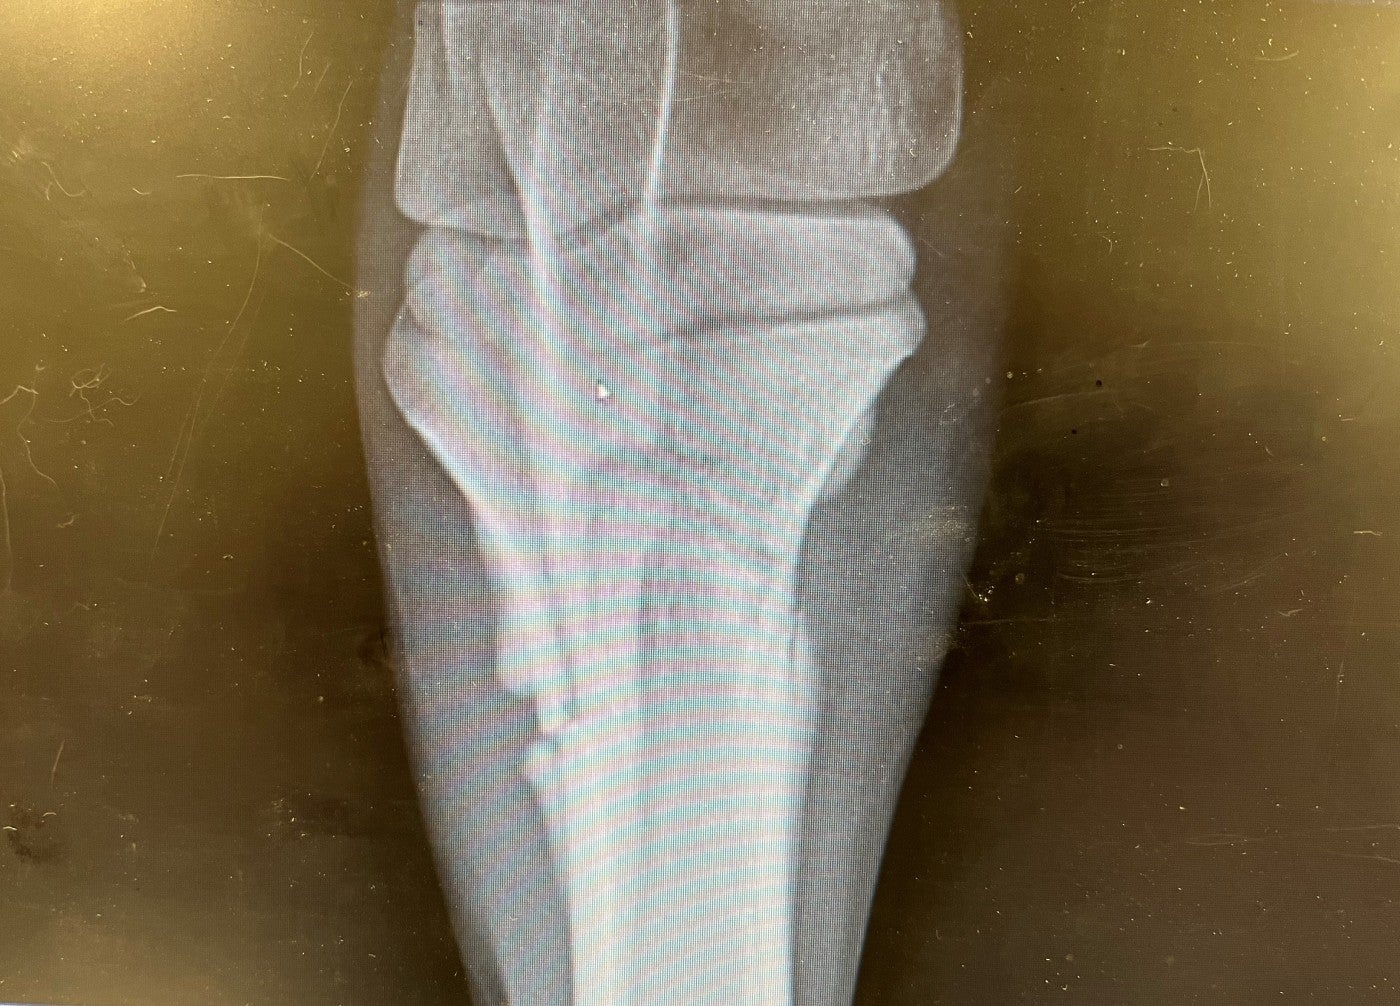 Radiograph image showing a horse's leg. A fracture runs through the middle of the bone.